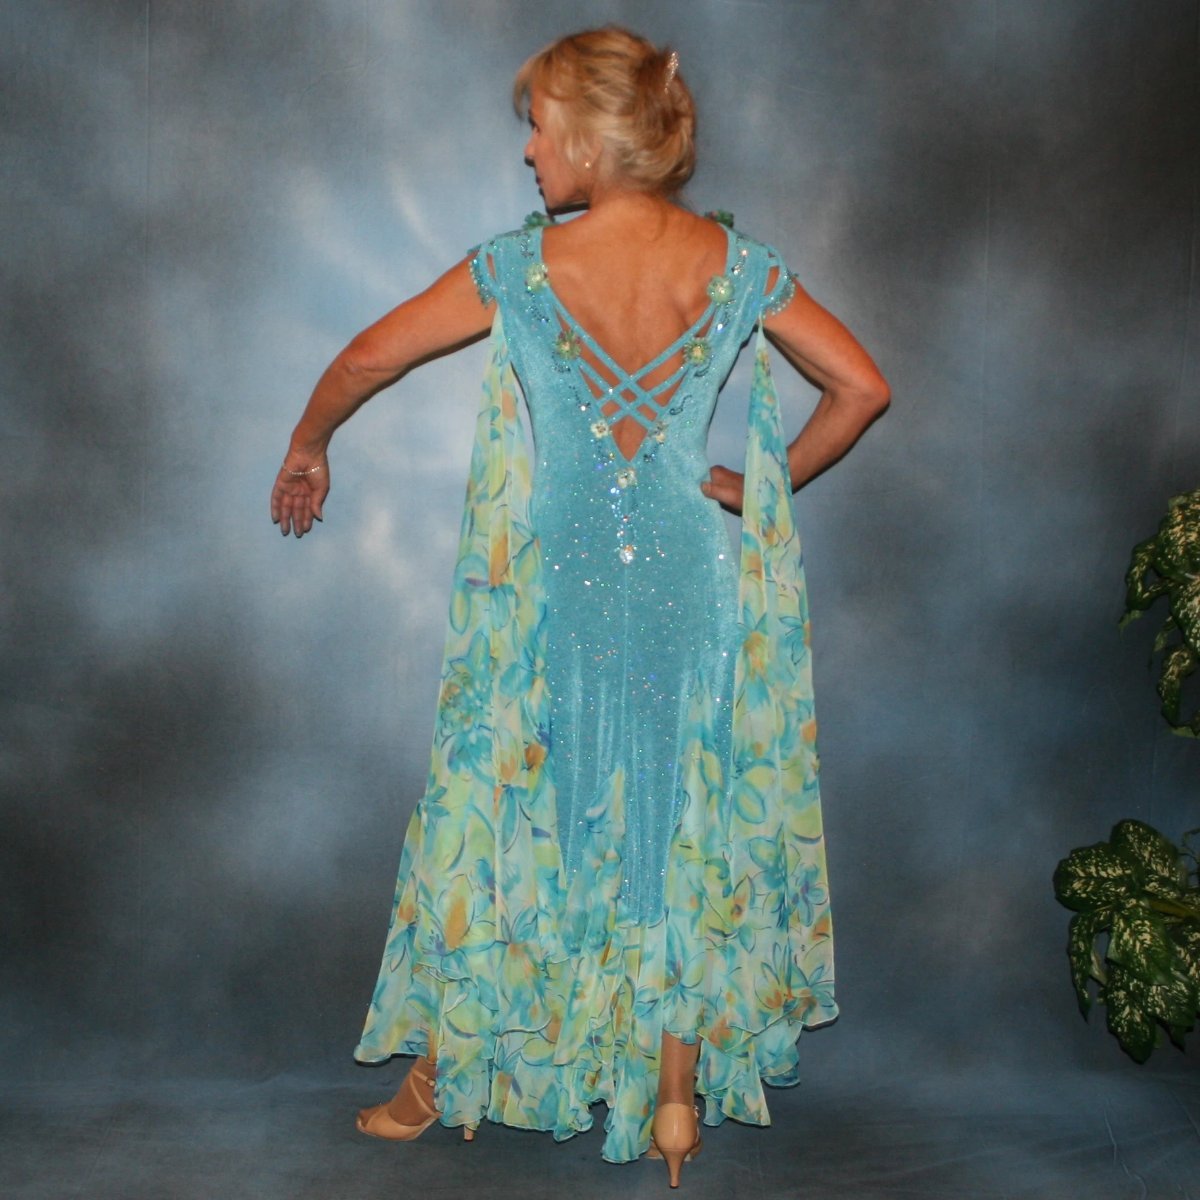 Crystal's Creations back view of Turquoise ballroom dress of turquoise glitter slinky features lattice work detailing with yards & yards of print chiffon, enhanced with velveteen flowers plus aquamarine Swarovski rhinestones, hand beading on shoulder detailing... with detachable floats.